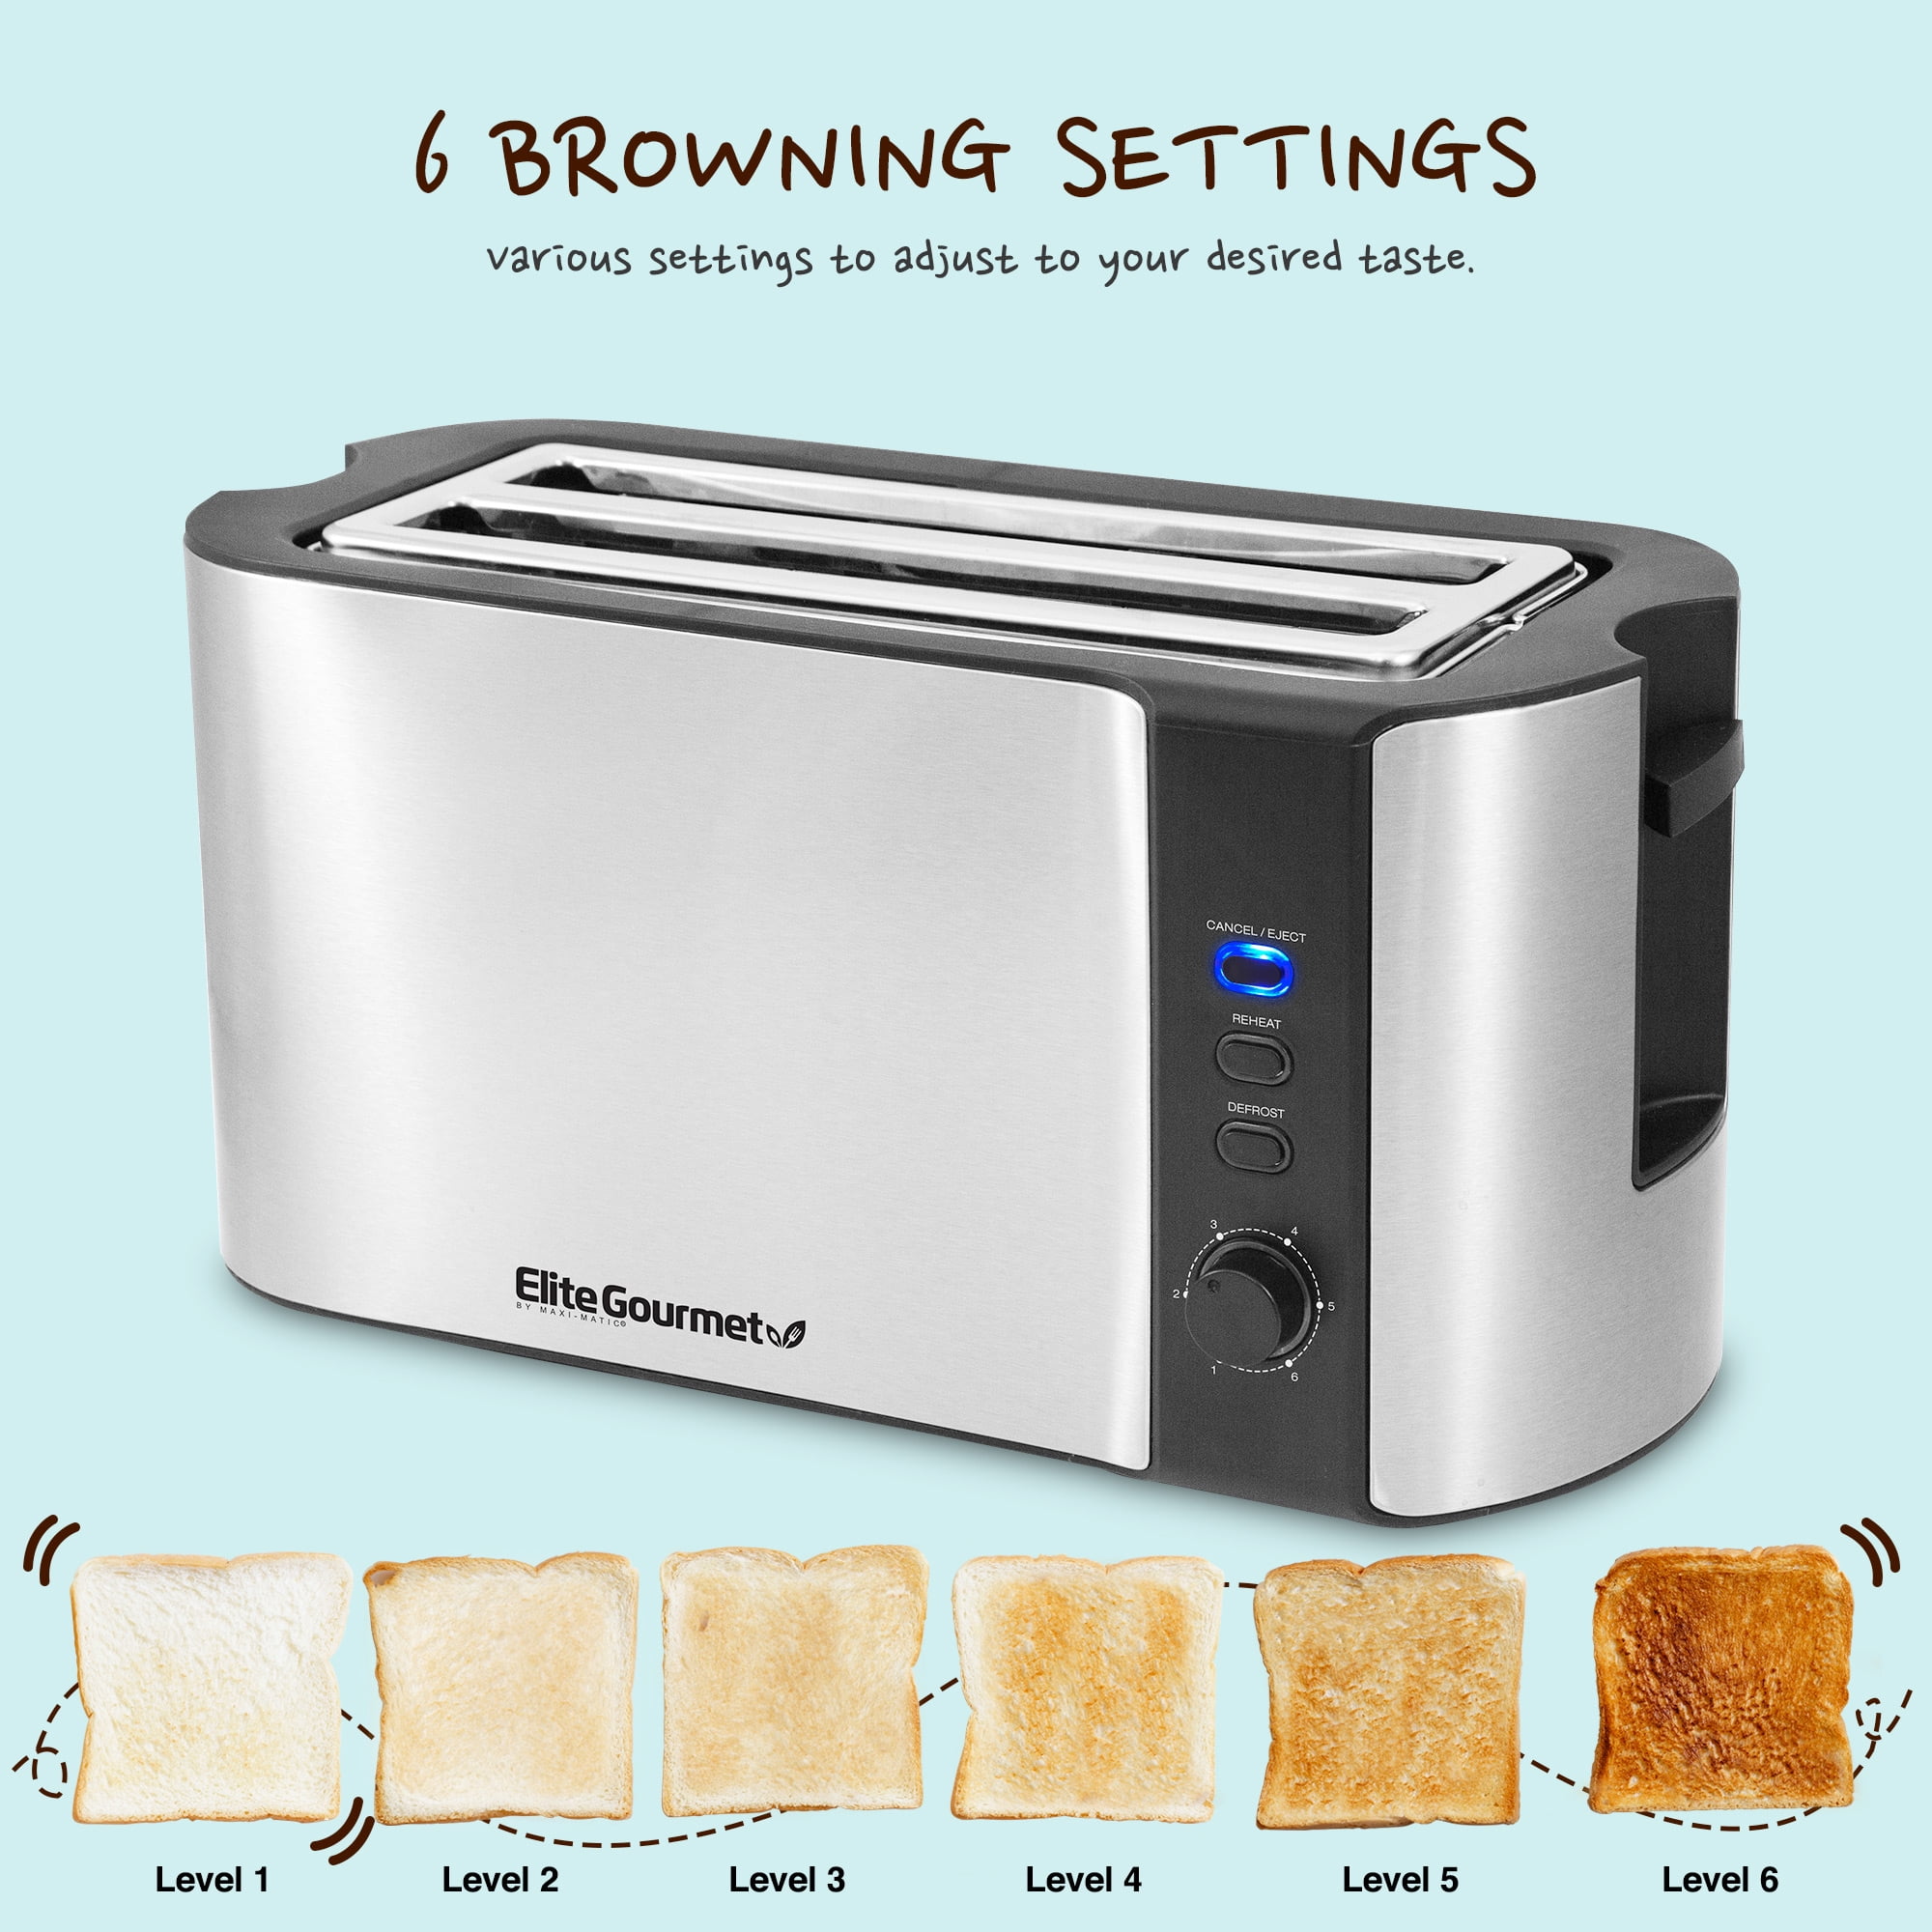 NEW VERSION Reheat STAINLESS STEEL Cancel and Defrost 6 Adjustable Toast Settings Croissants Elite Gourmet ECT-3100 Maxi-Matic 4 Slice Long Toaster with Extra Wide Slot for Bread and Buns 